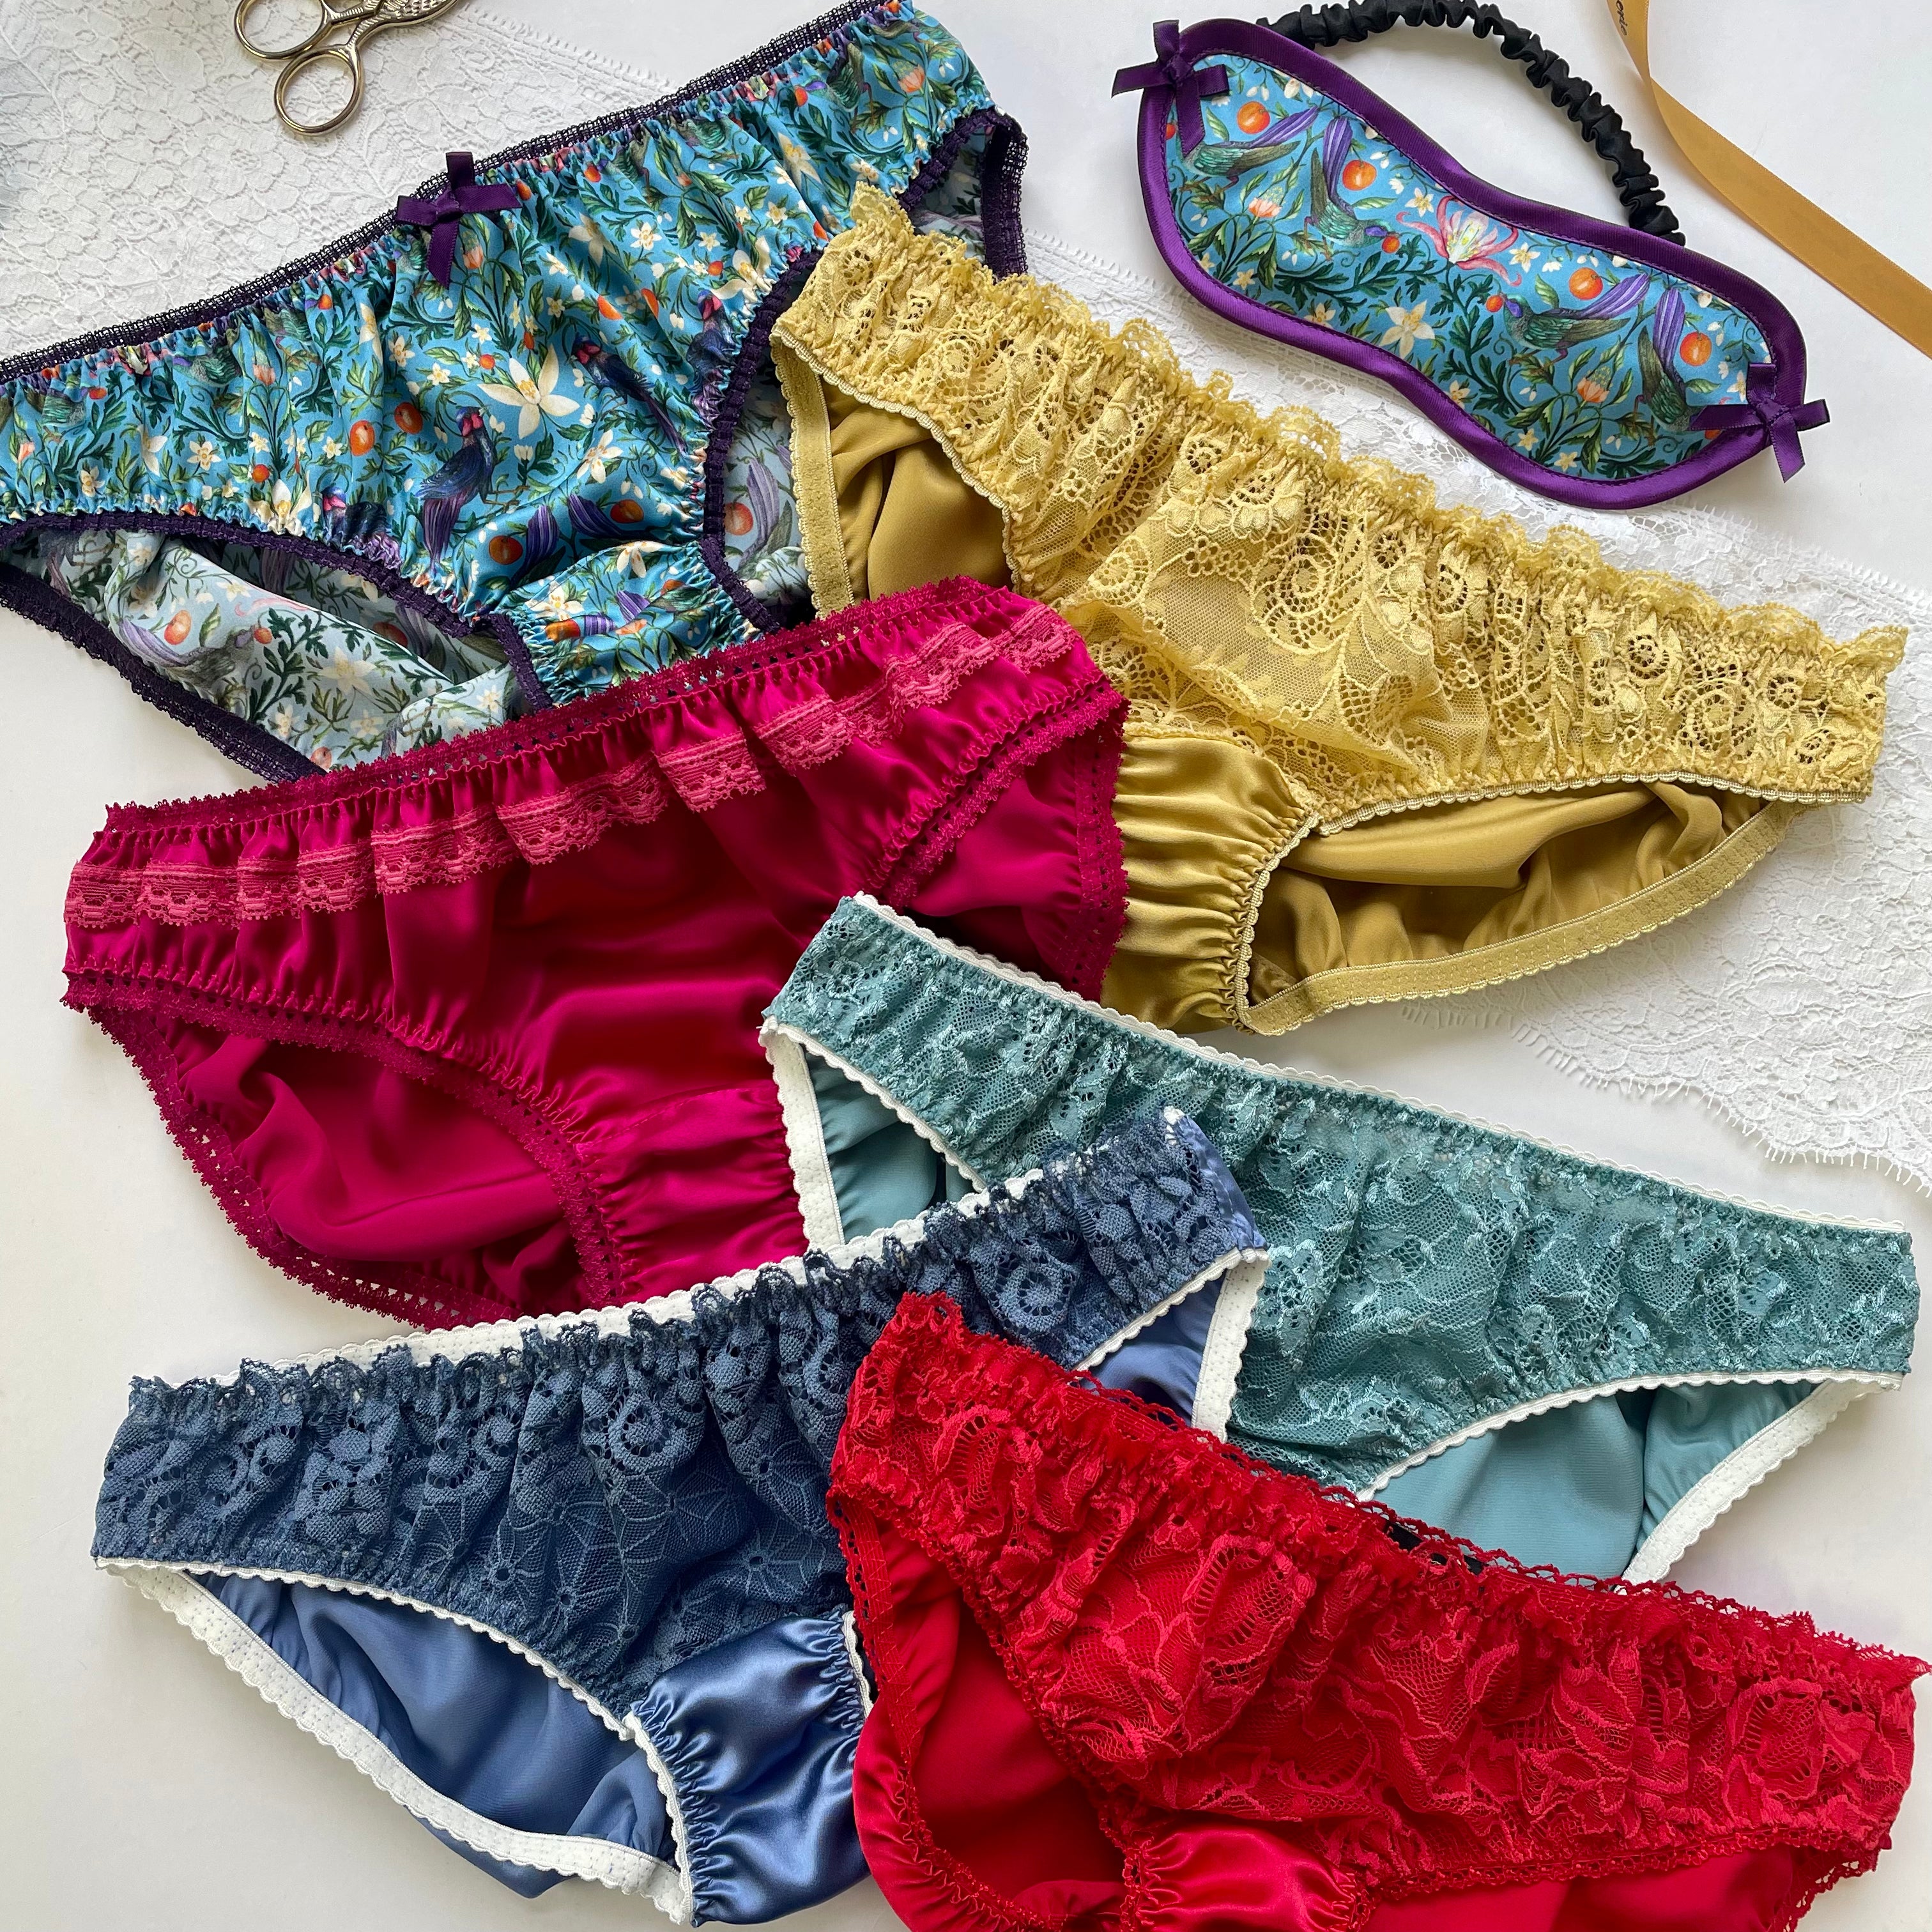 Dopamine Dressing - Using Colourful Lingerie To Brighten Your